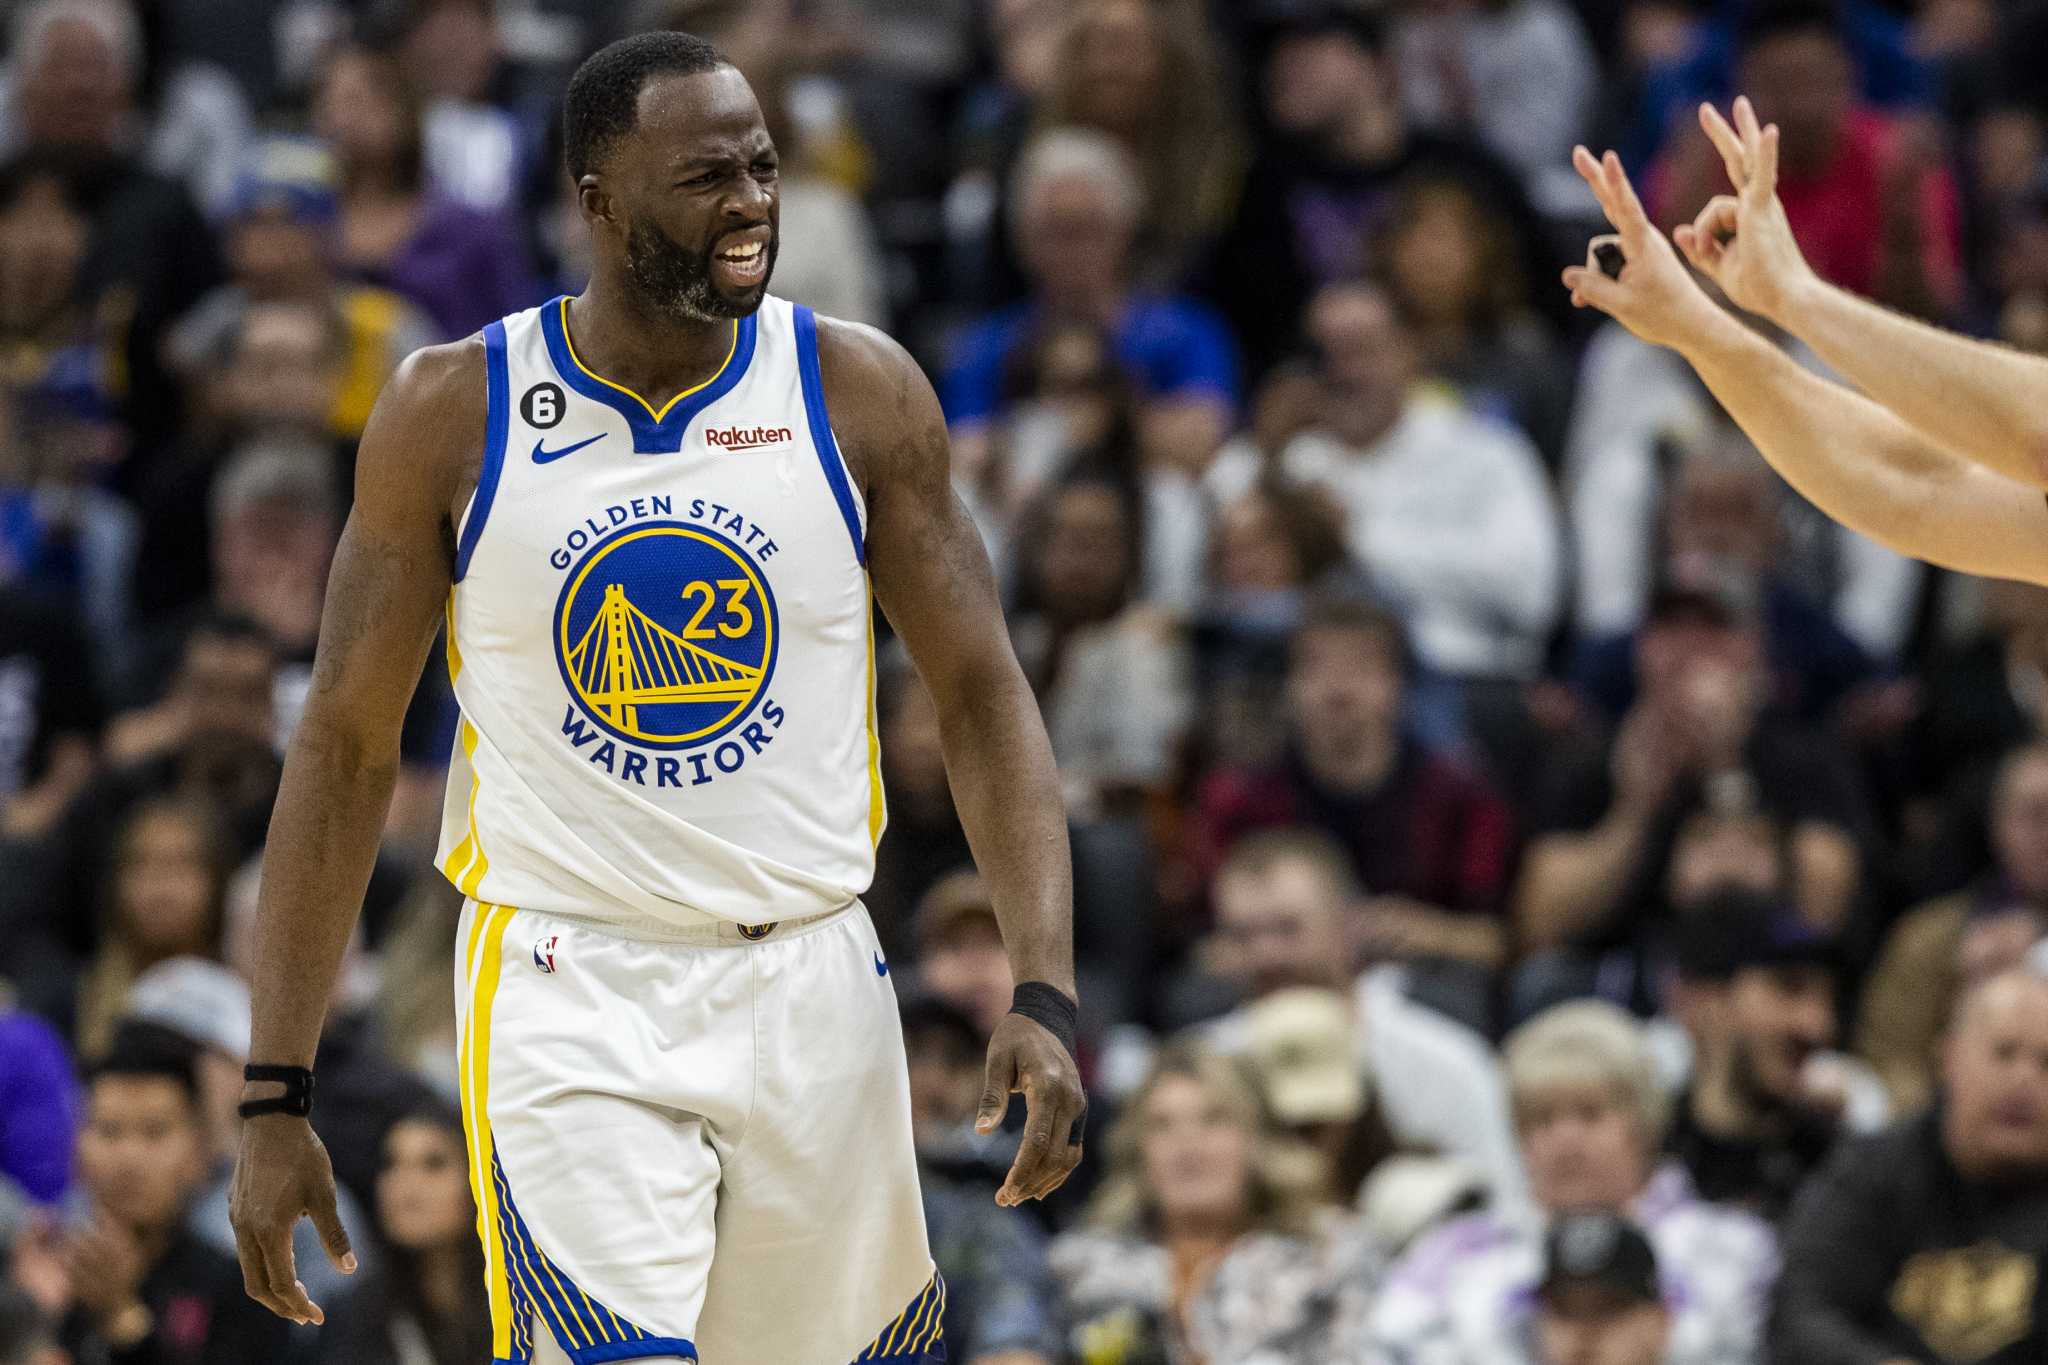 Warriors Draymond Green discusses his friendship with LeBron James